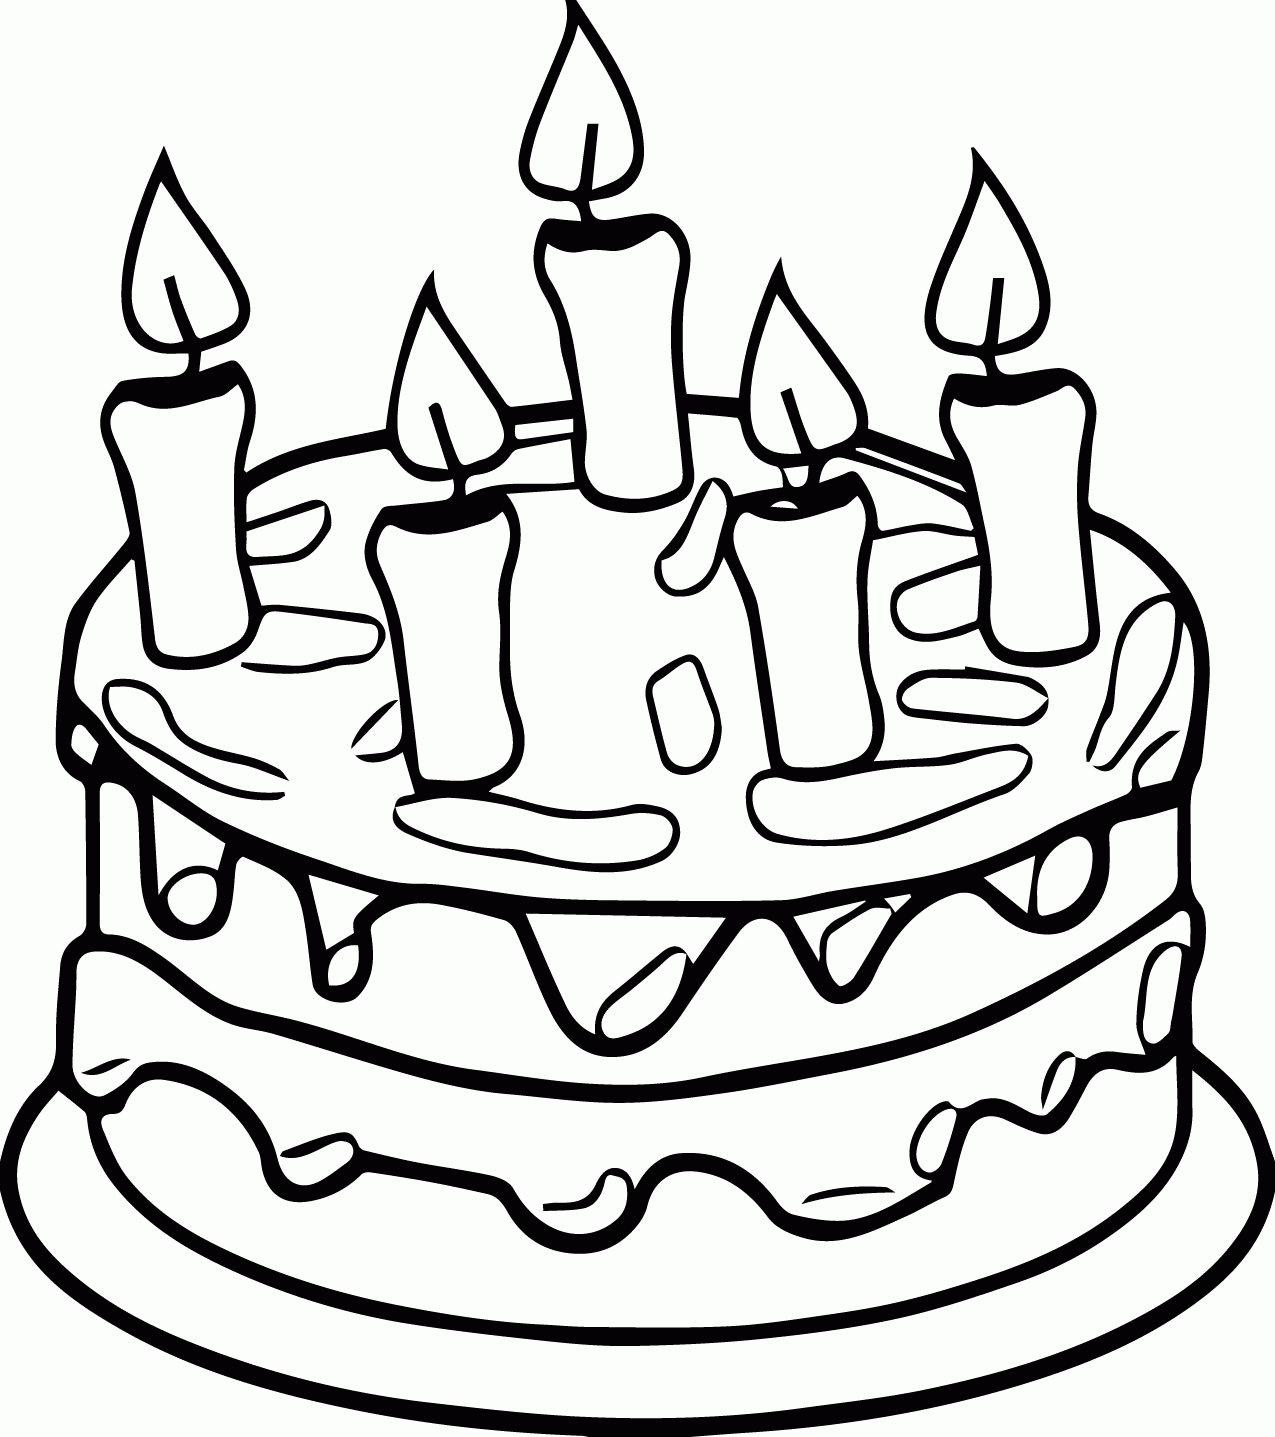 Birthday Cake Coloring Page | Wecoloringpage